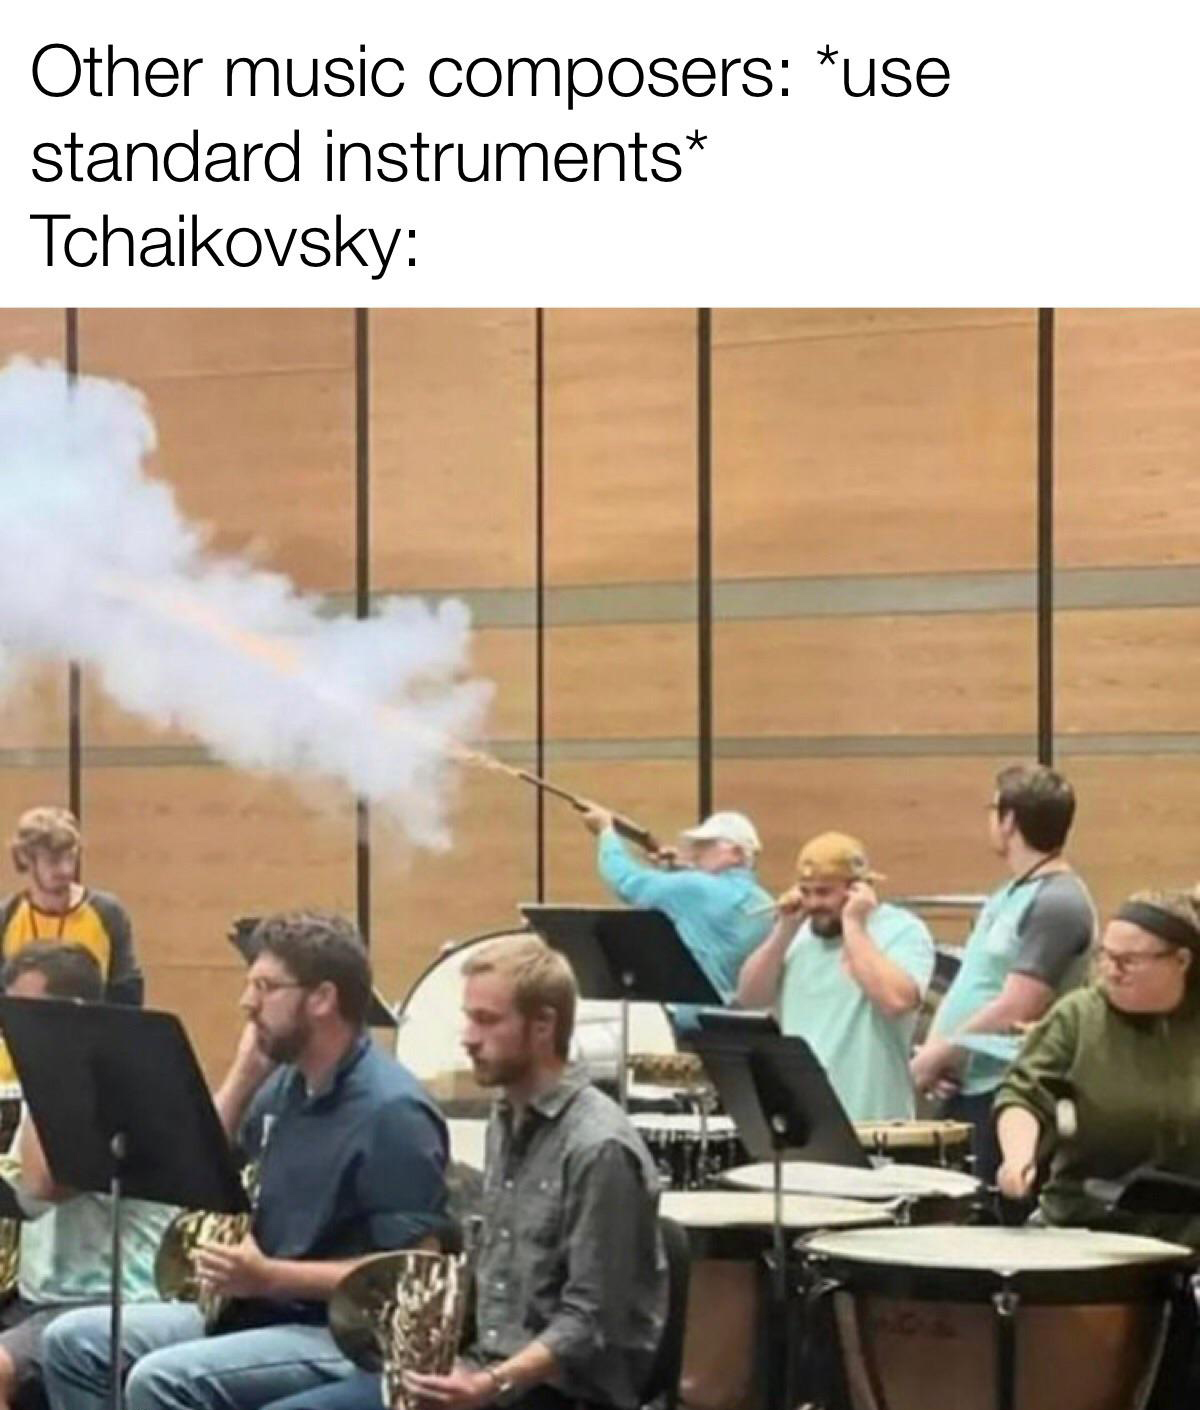 dank memes and pics - presentation - Other music composers use standard instruments Tchaikovsky